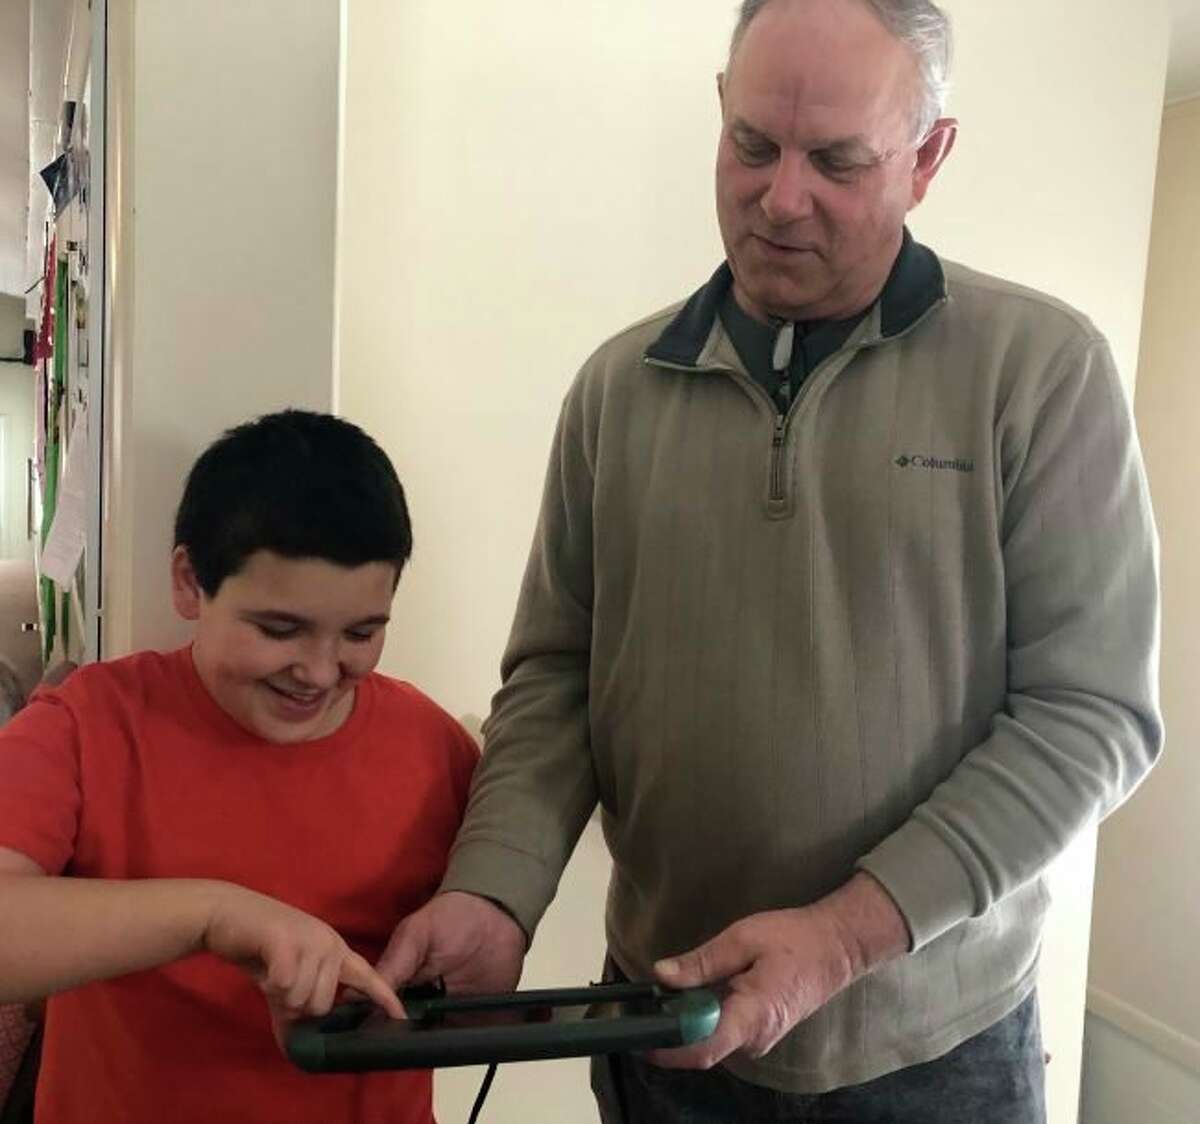 The Frankfort Lions Club helps raise money to purchase equipment needed by area residents, such as this communication pad purchased to help Frankfort resident Isaiah Borton (left) communicate. Also show is Gene Lentz, Frankfort Lions Club President. (Courtesy Photo)   